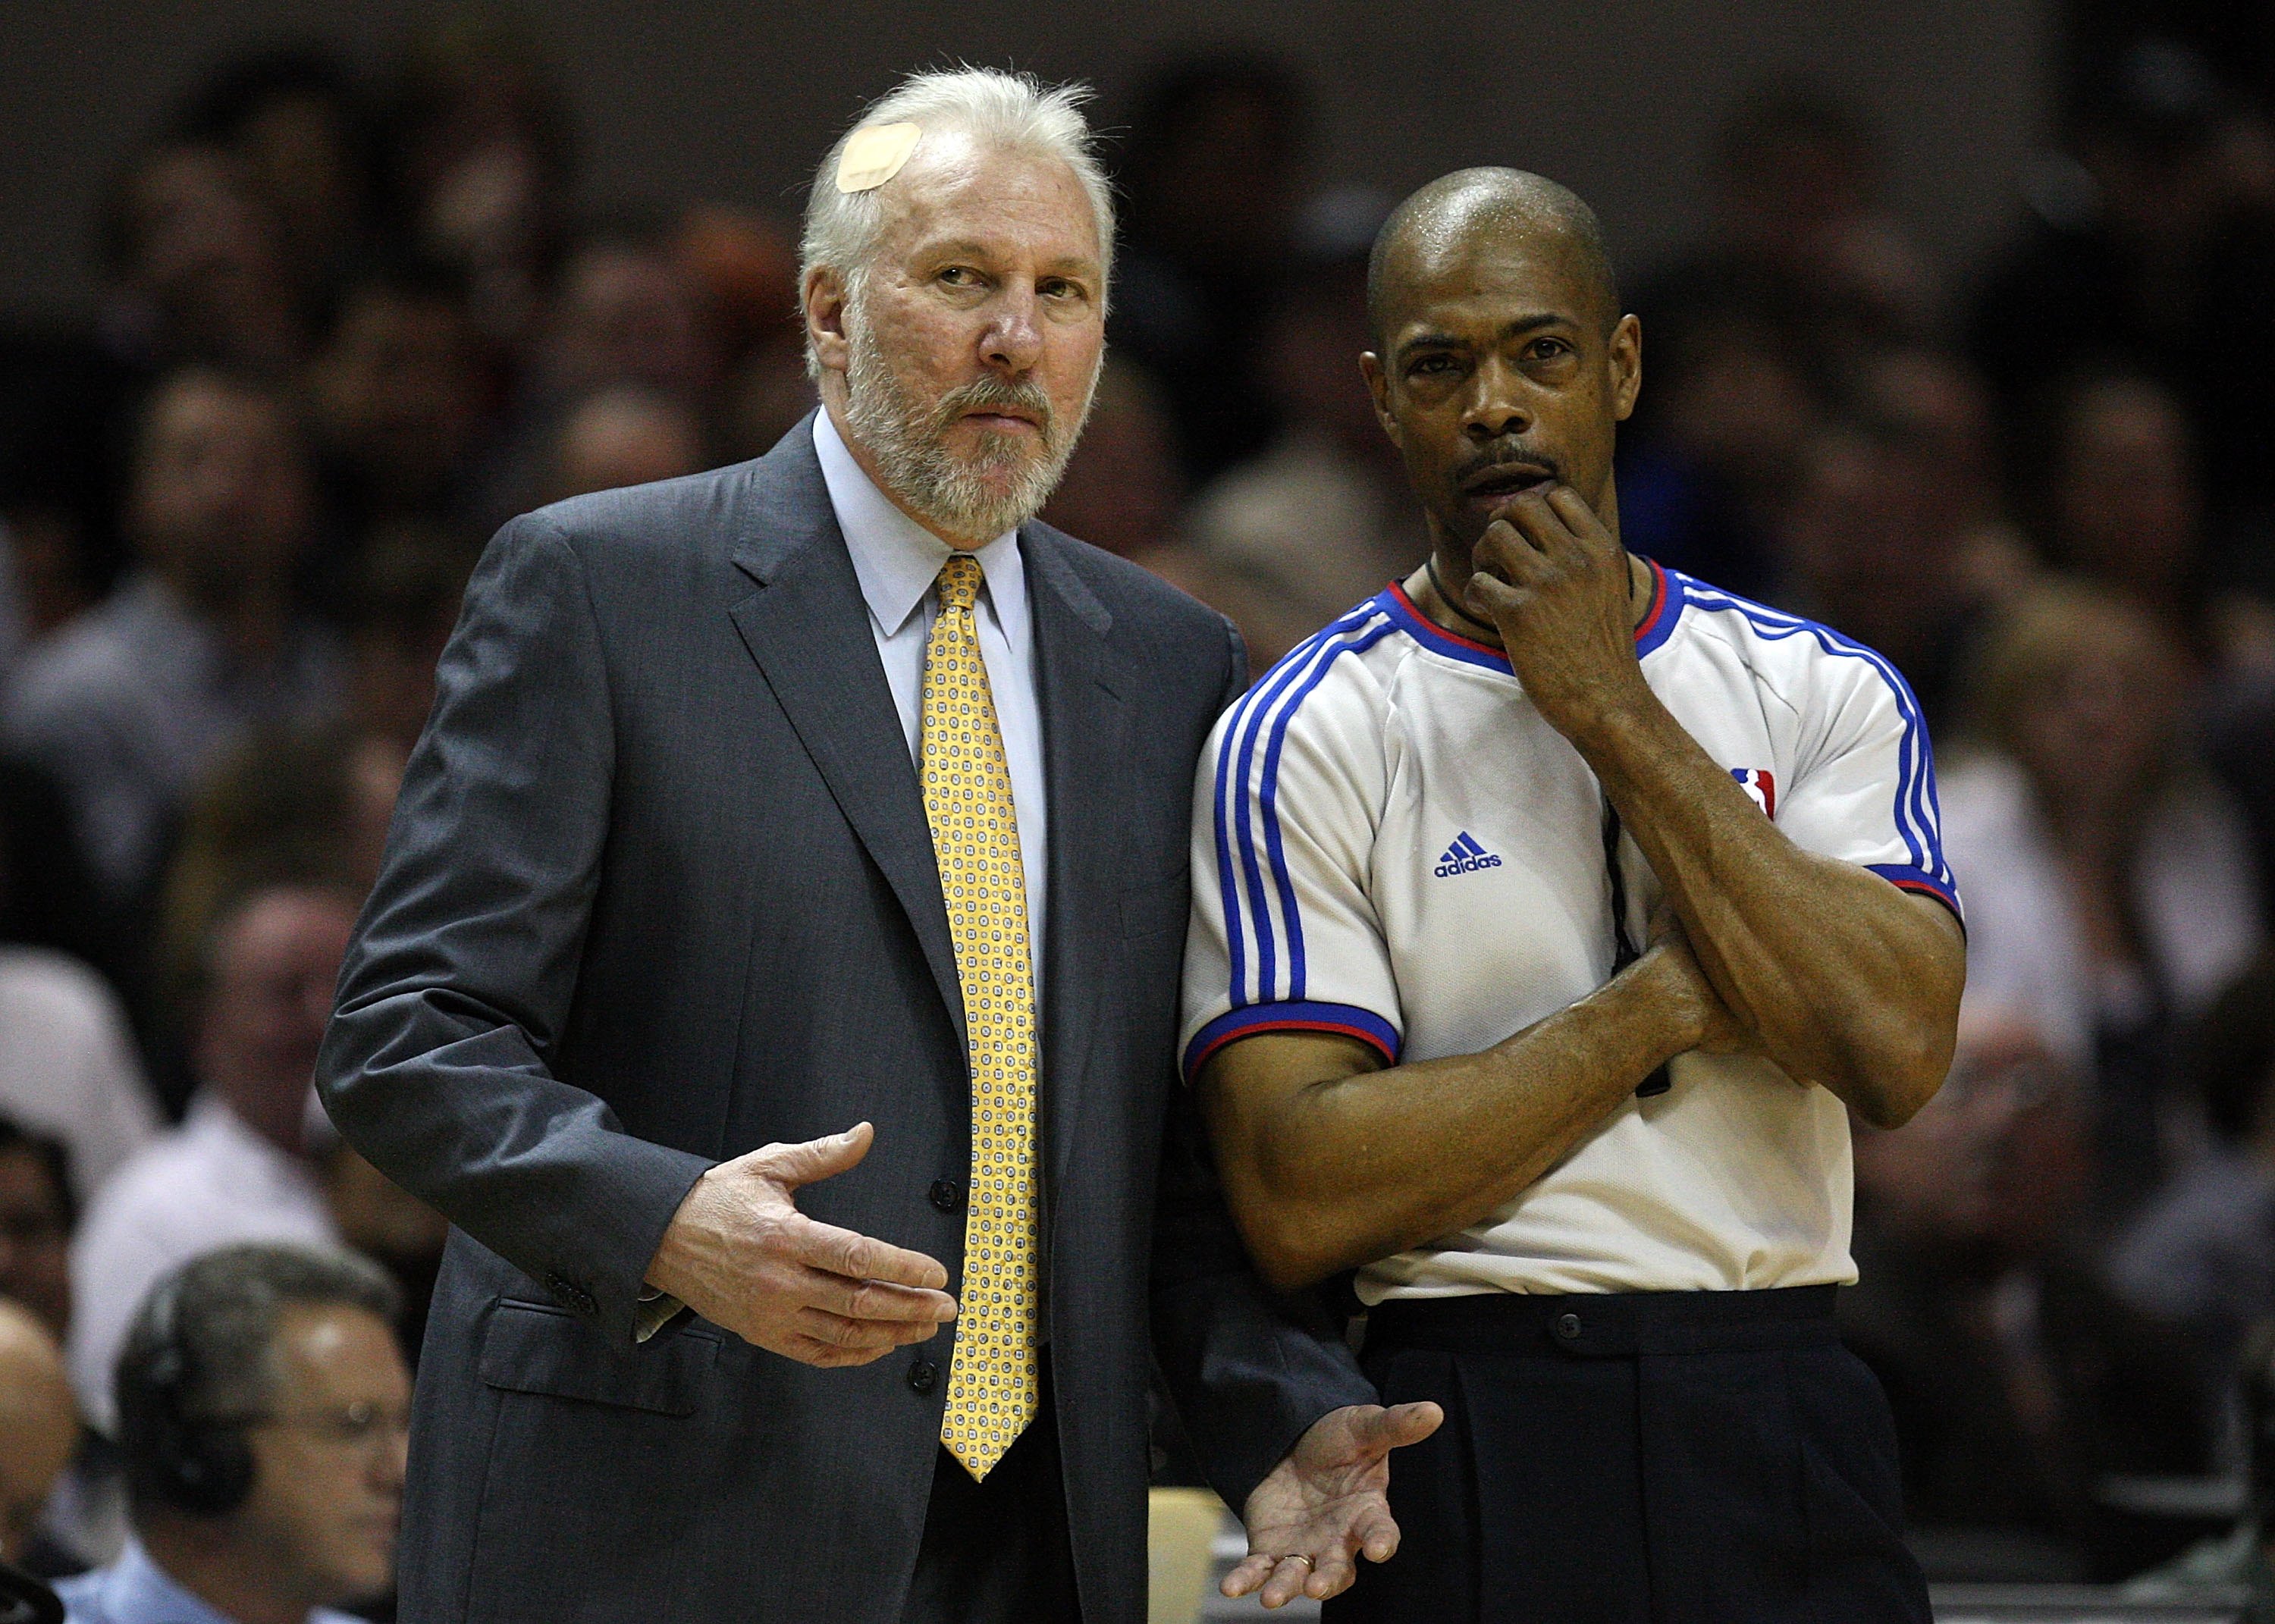 SAN ANTONIO - JANUARY 31:  NBA referee Tom Washington with Gregg Popovich of the San Antonio Spurs on January 31, 2009 at AT&T Center in San Antonio, Texas.  NOTE TO USER: User expressly acknowledges and agrees that, by downloading and/or using this Photo